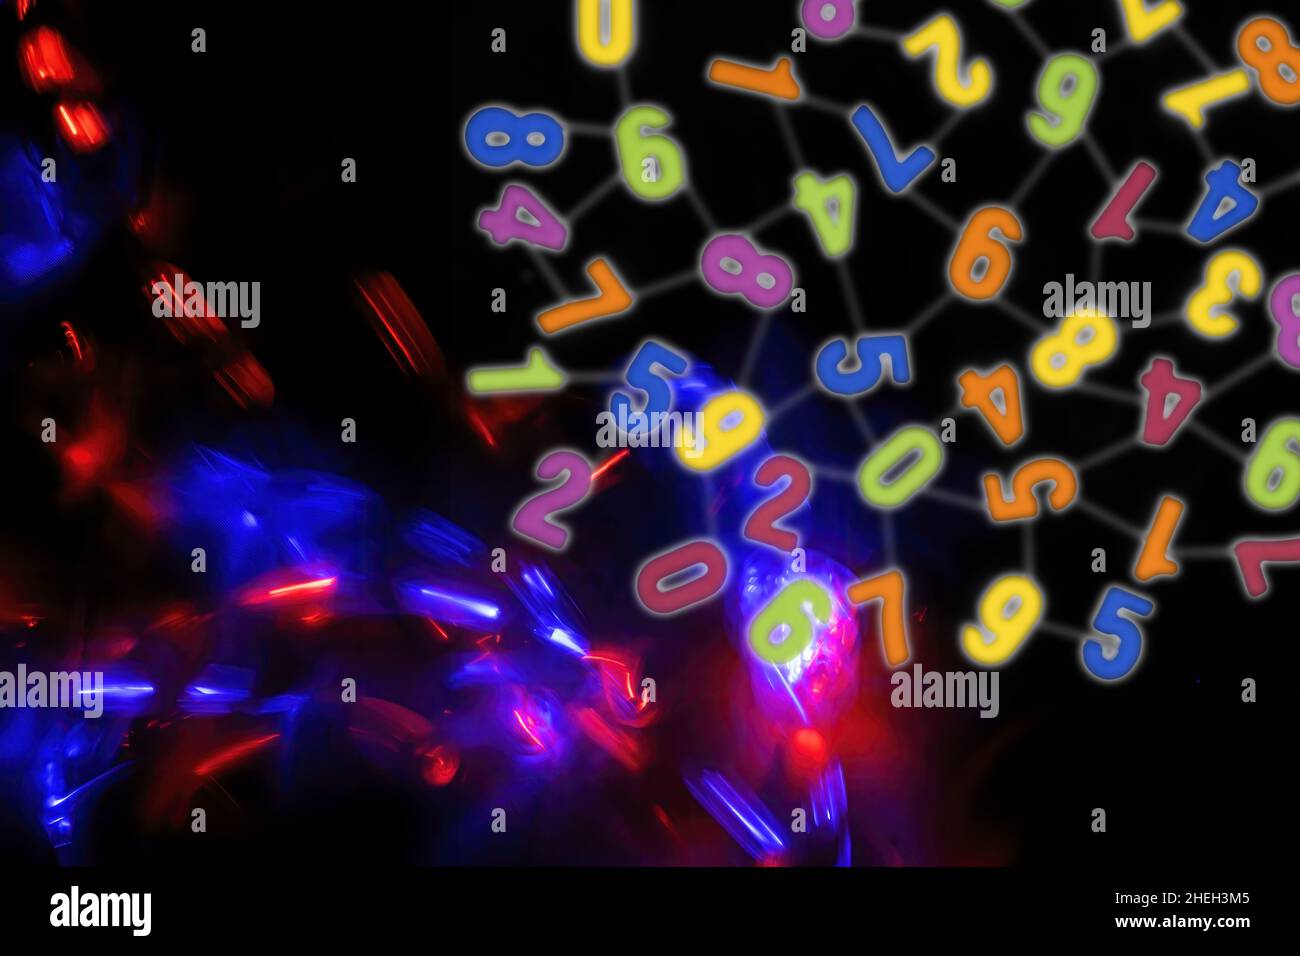 Multitude of numbers of different colors on black background, concept of pseudoscience of numerology Stock Photo